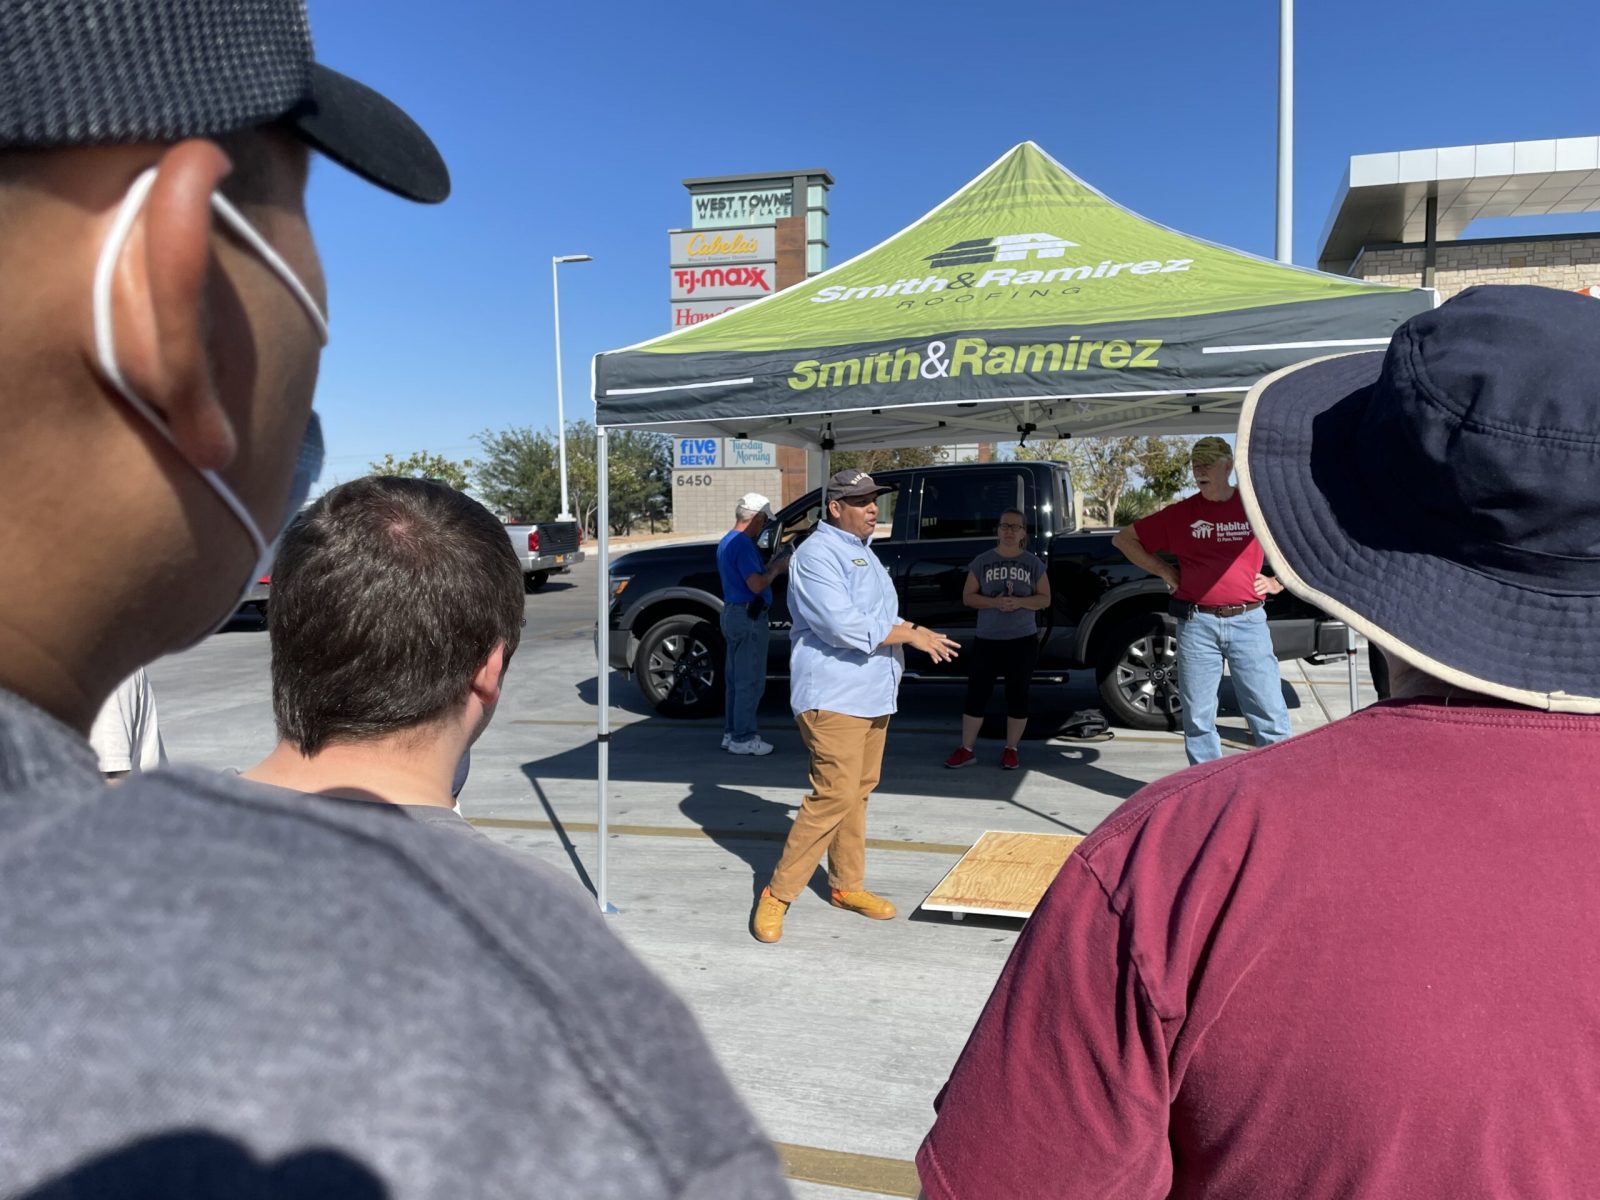 Chick-Fil-A Habitat for Humanity Event